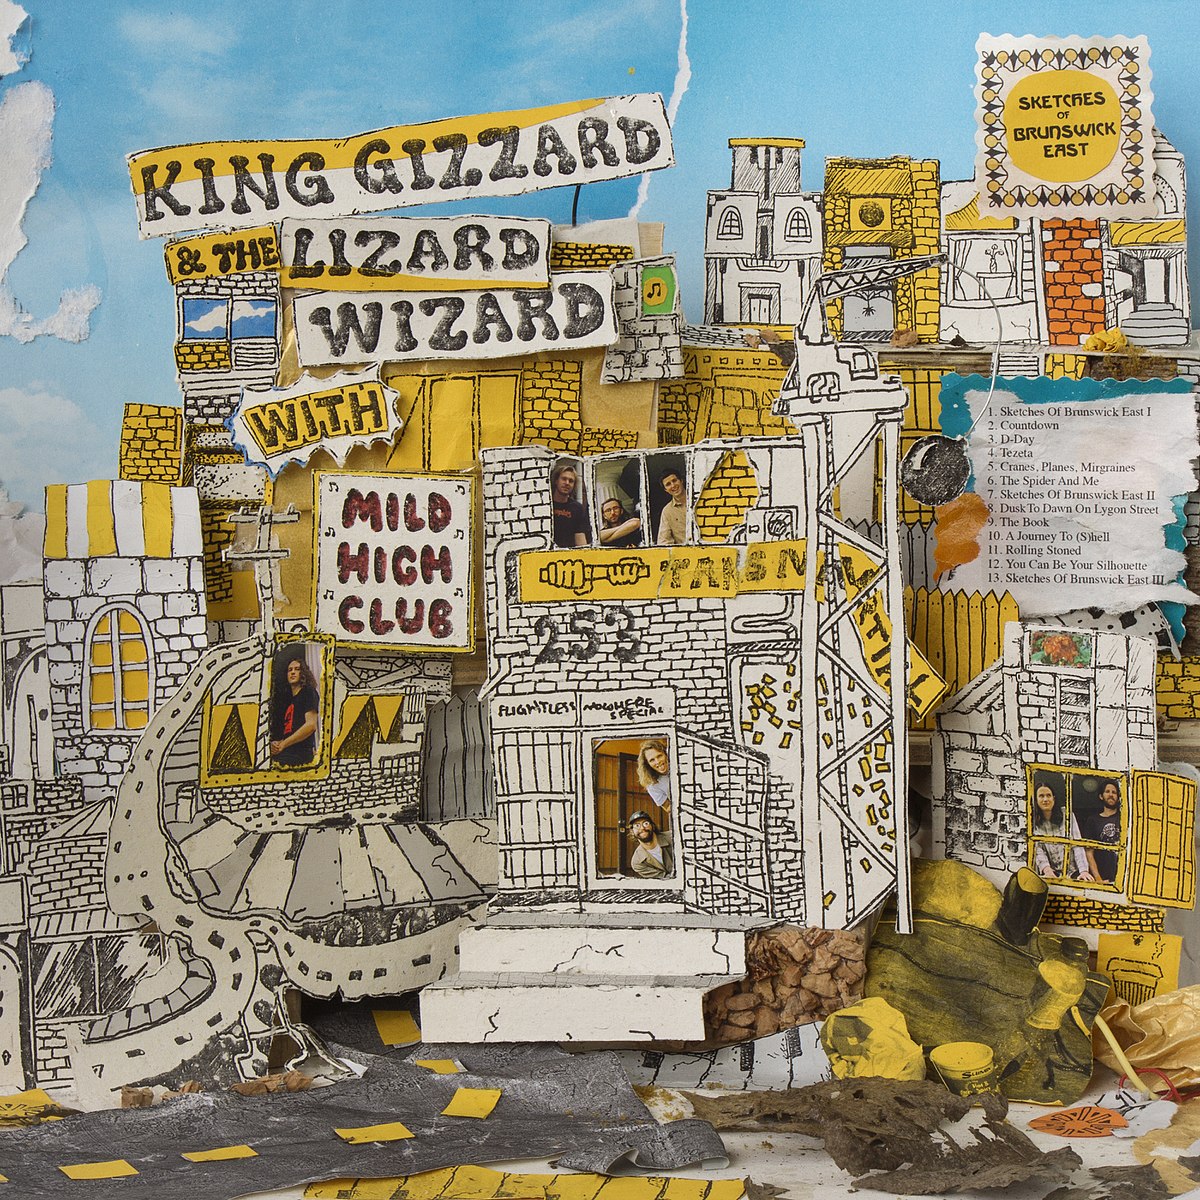 King Gizzard and the Lizard Wizard - Sketches Of Brunswick East (Vinyl LP)